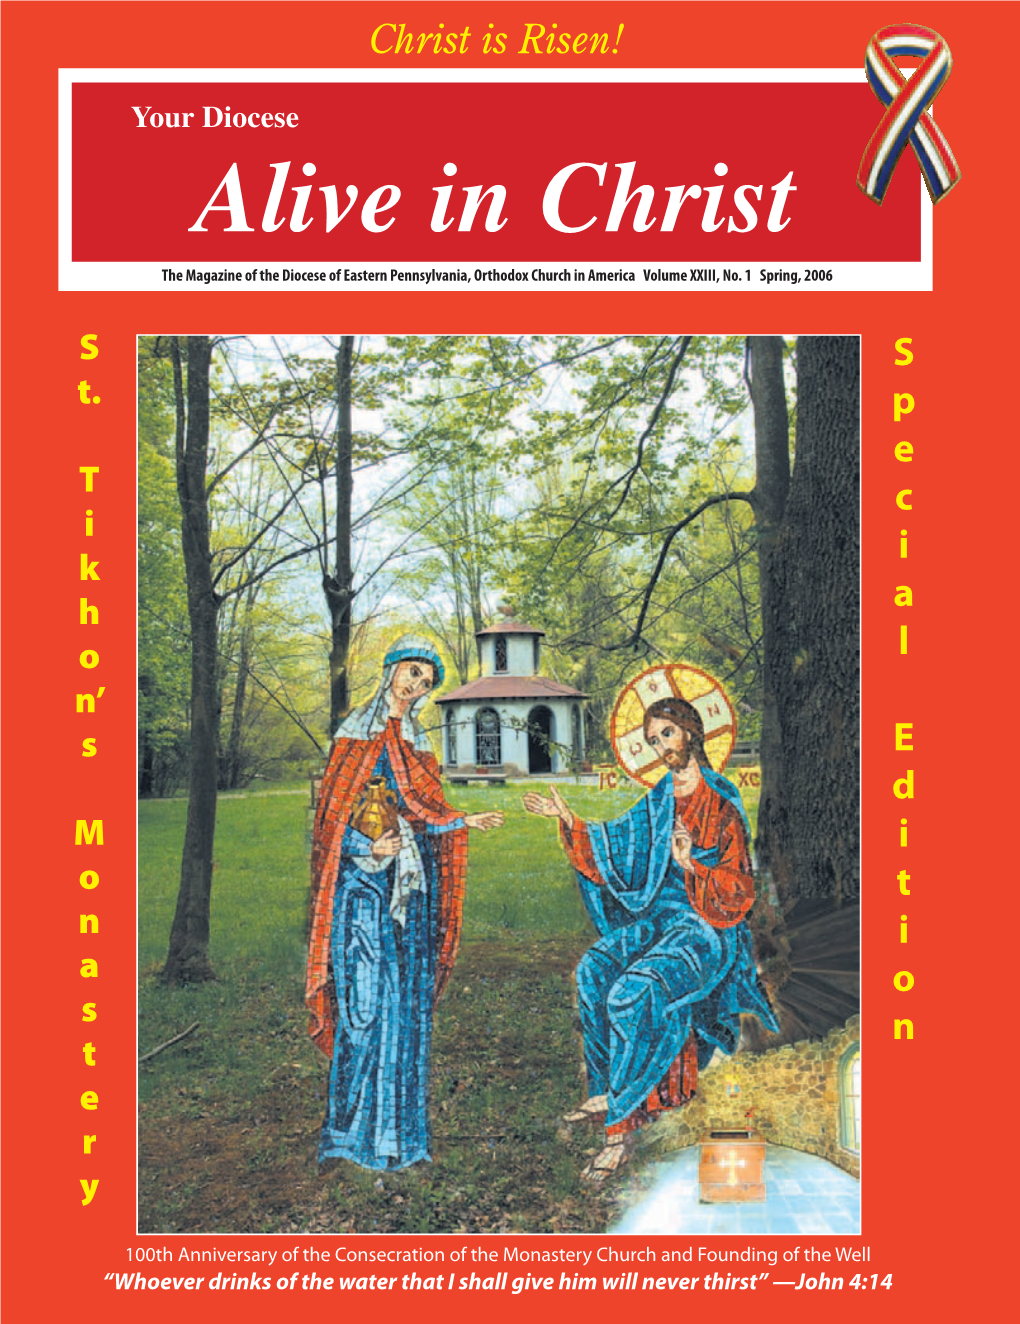 Alive in Christ the Magazine of the Diocese of Eastern Pennsylvania, Orthodox Church in America Volume XXIII, No